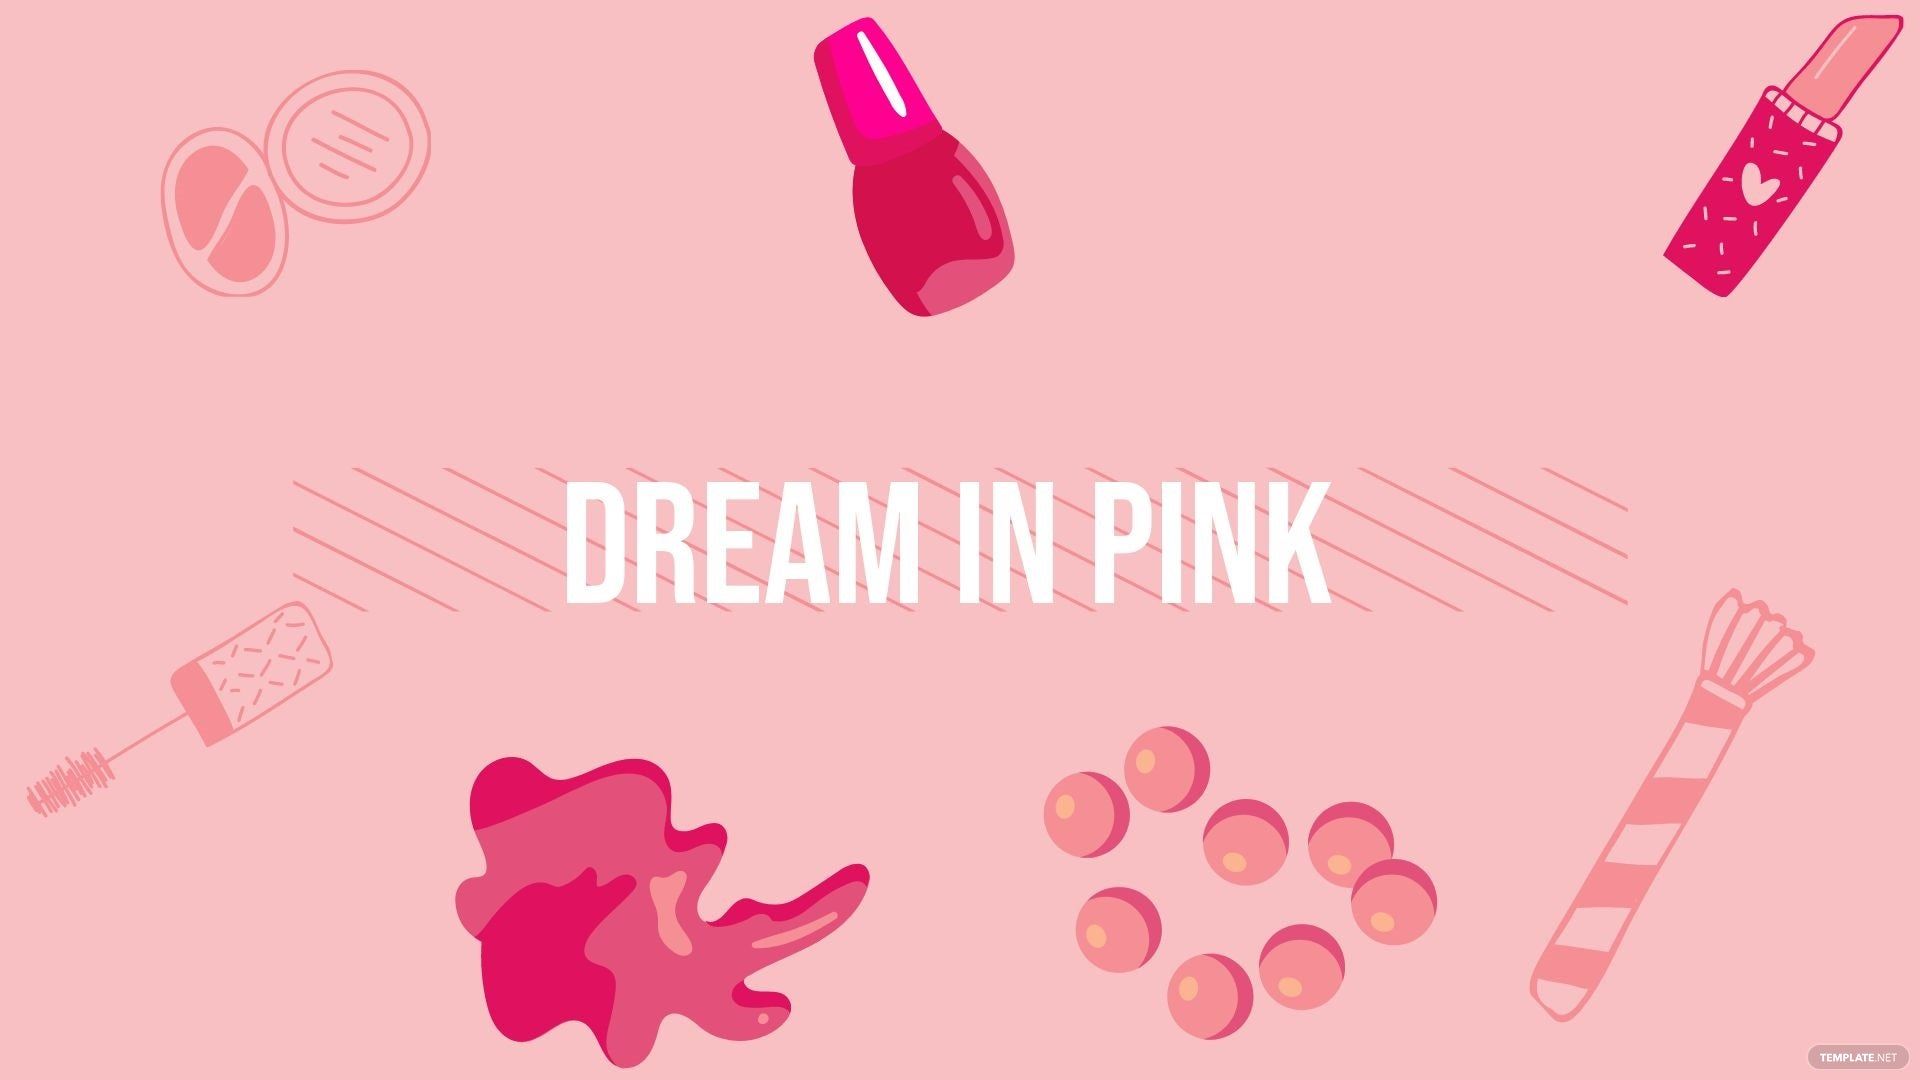 A pink background with various pink items on it, including a lipstick, nail polish, and a mirror. The words 